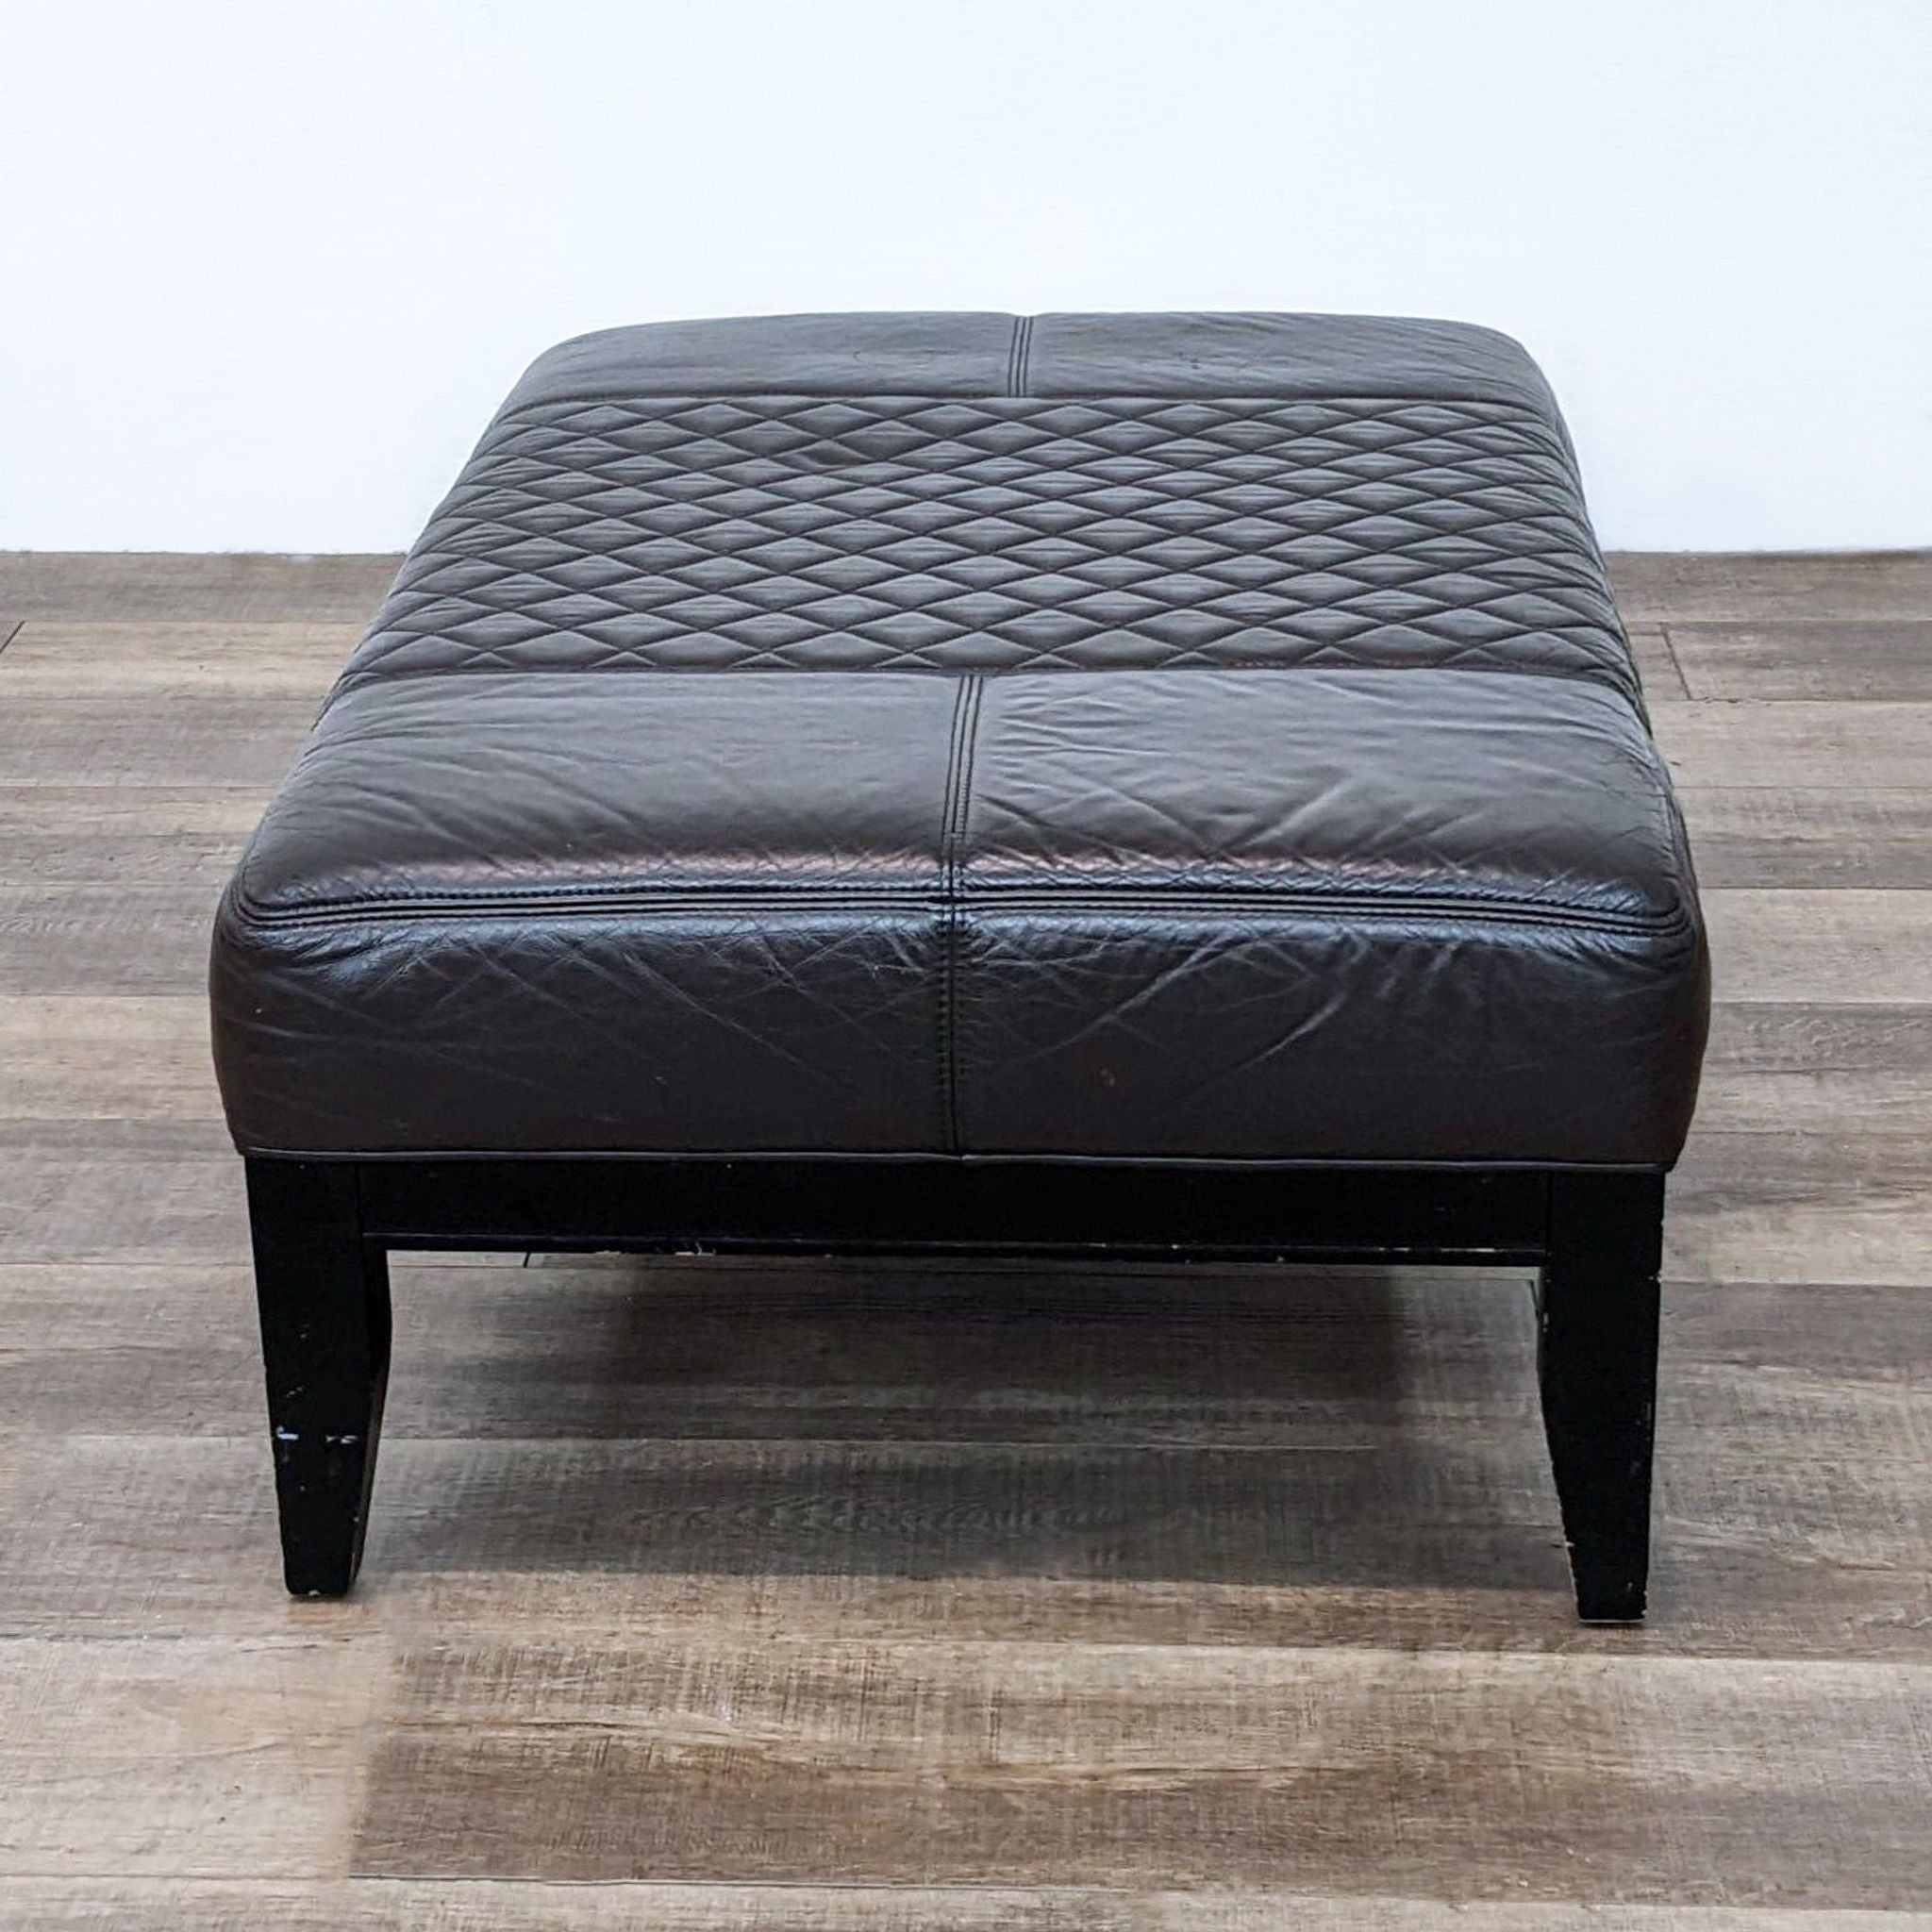 Reperch brand brown leather ottoman with quilted top and dark wooden legs on a wooden floor.